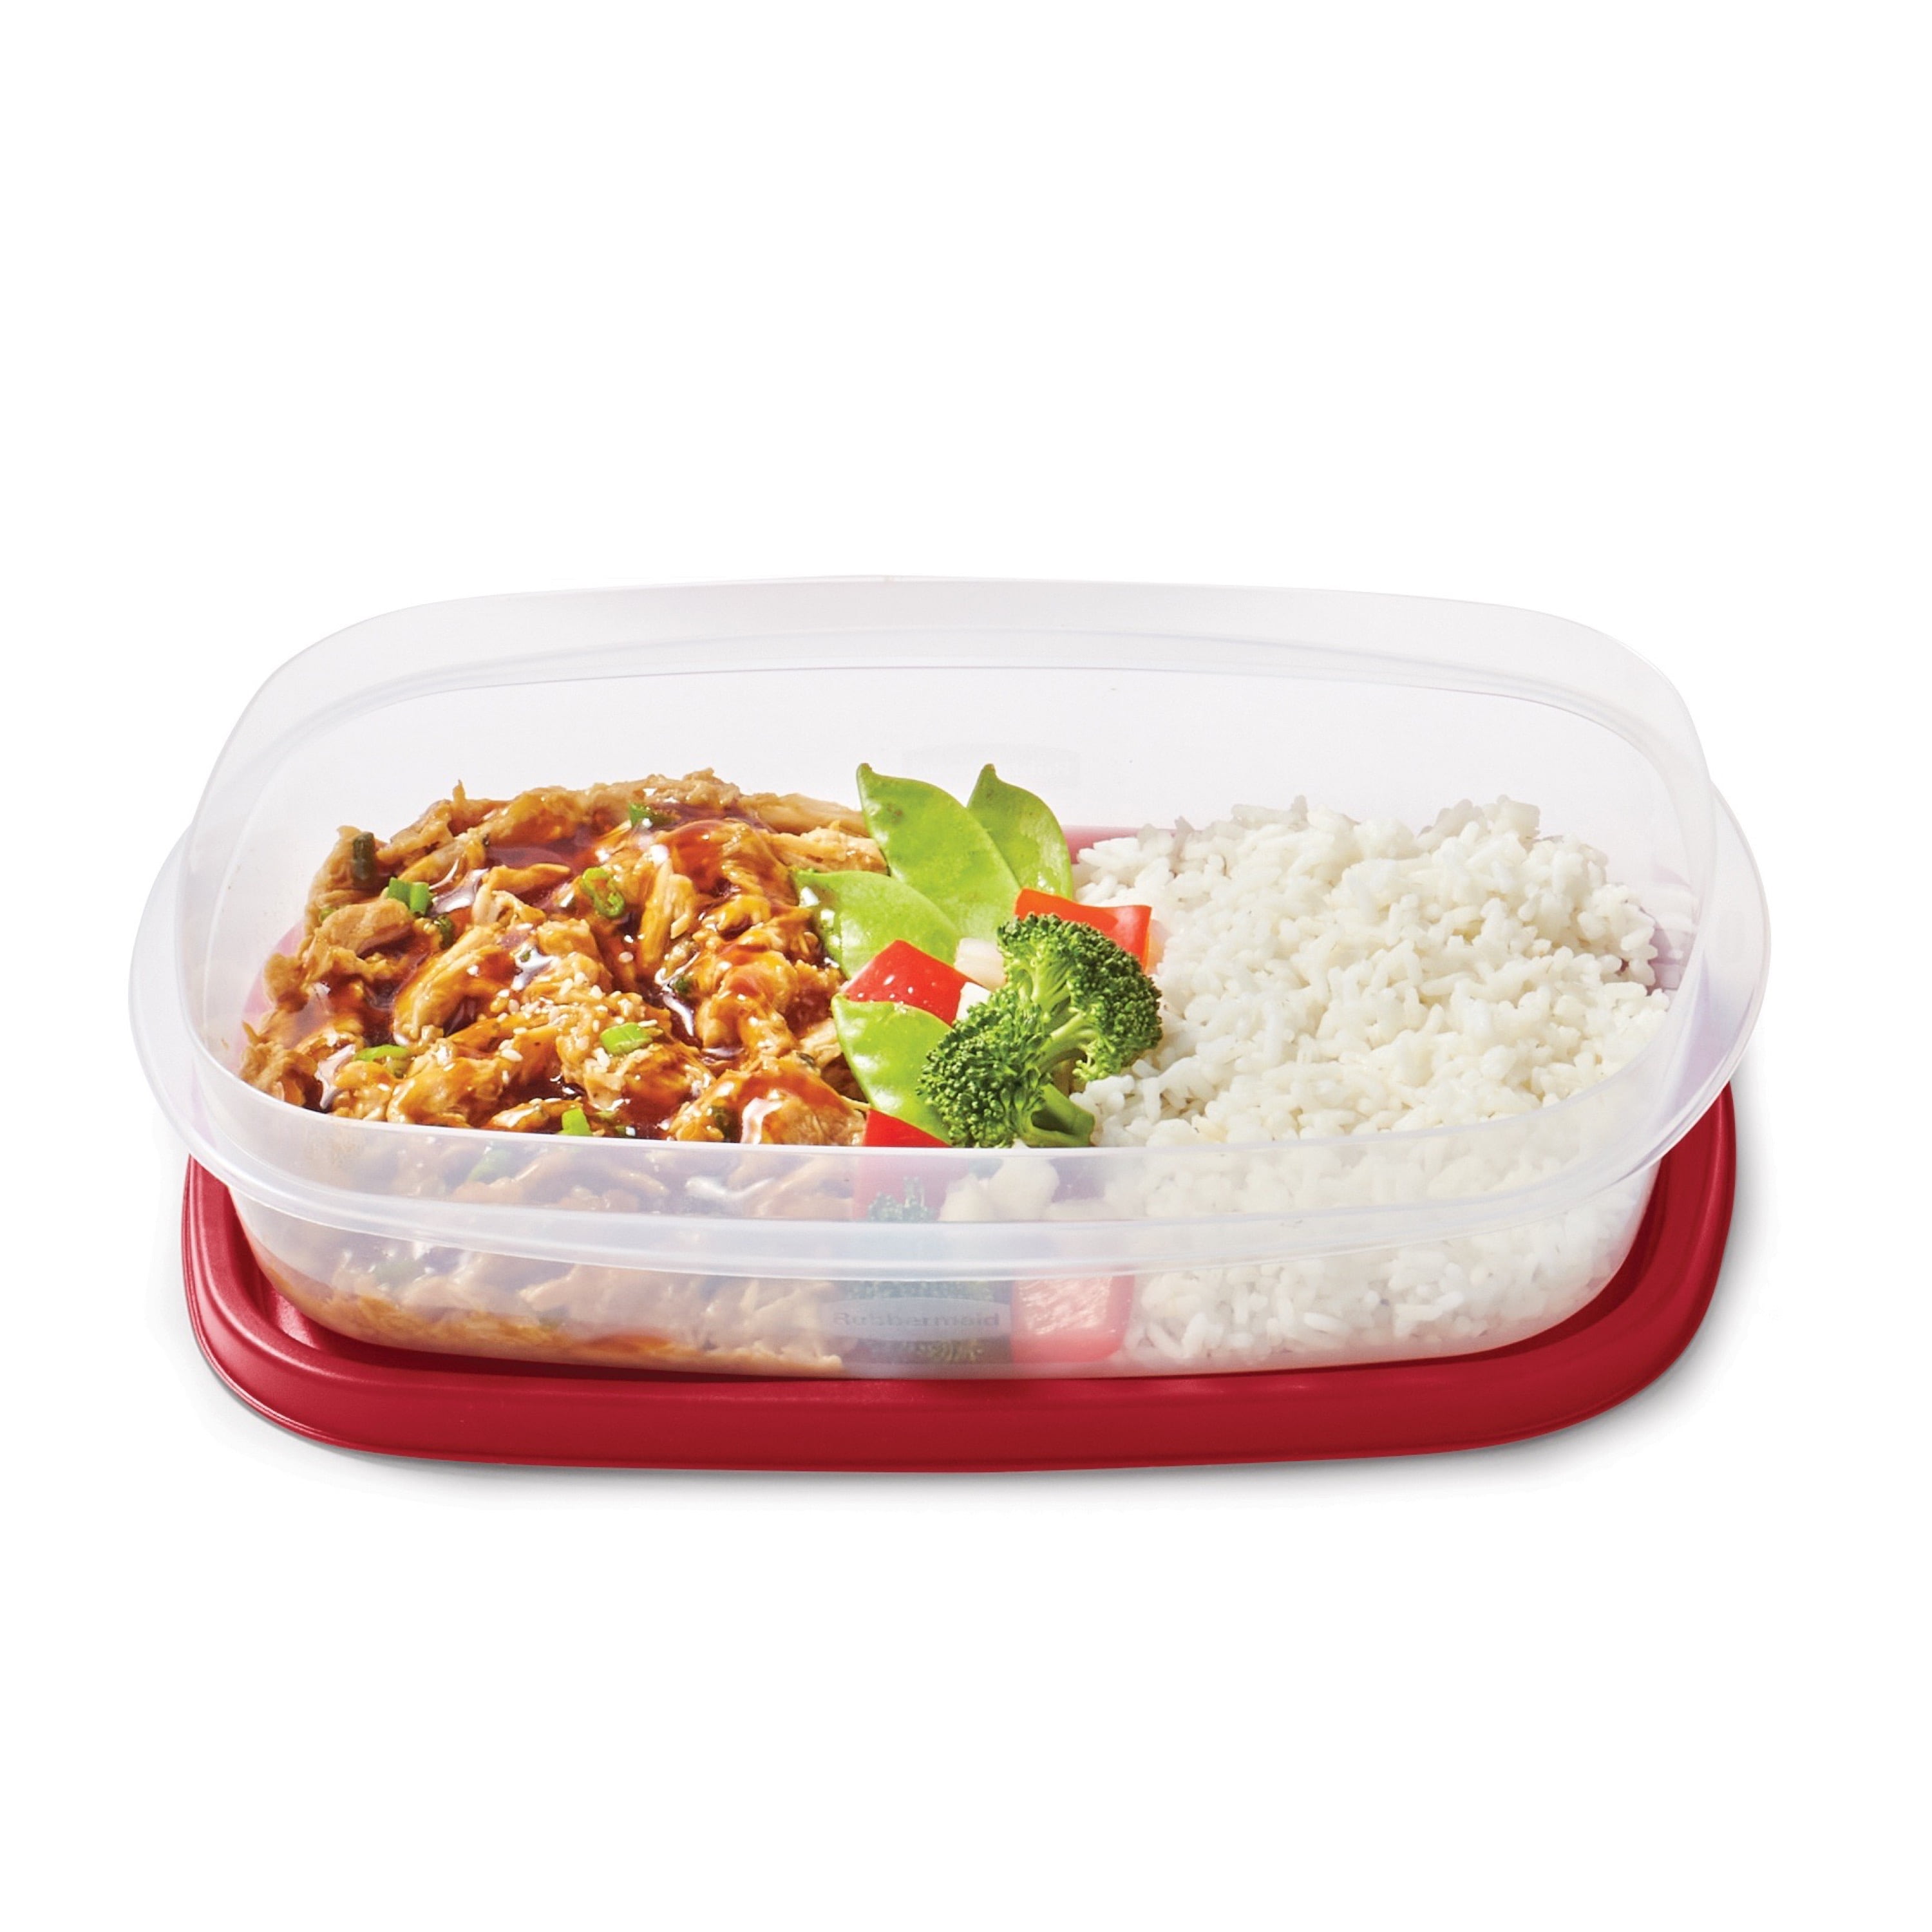 Rubbermaid Easy Find Lids Meal Prep Rectangular Food Storage Containers - 6  Pack - Clear/Red, 5.1 c - Fry's Food Stores